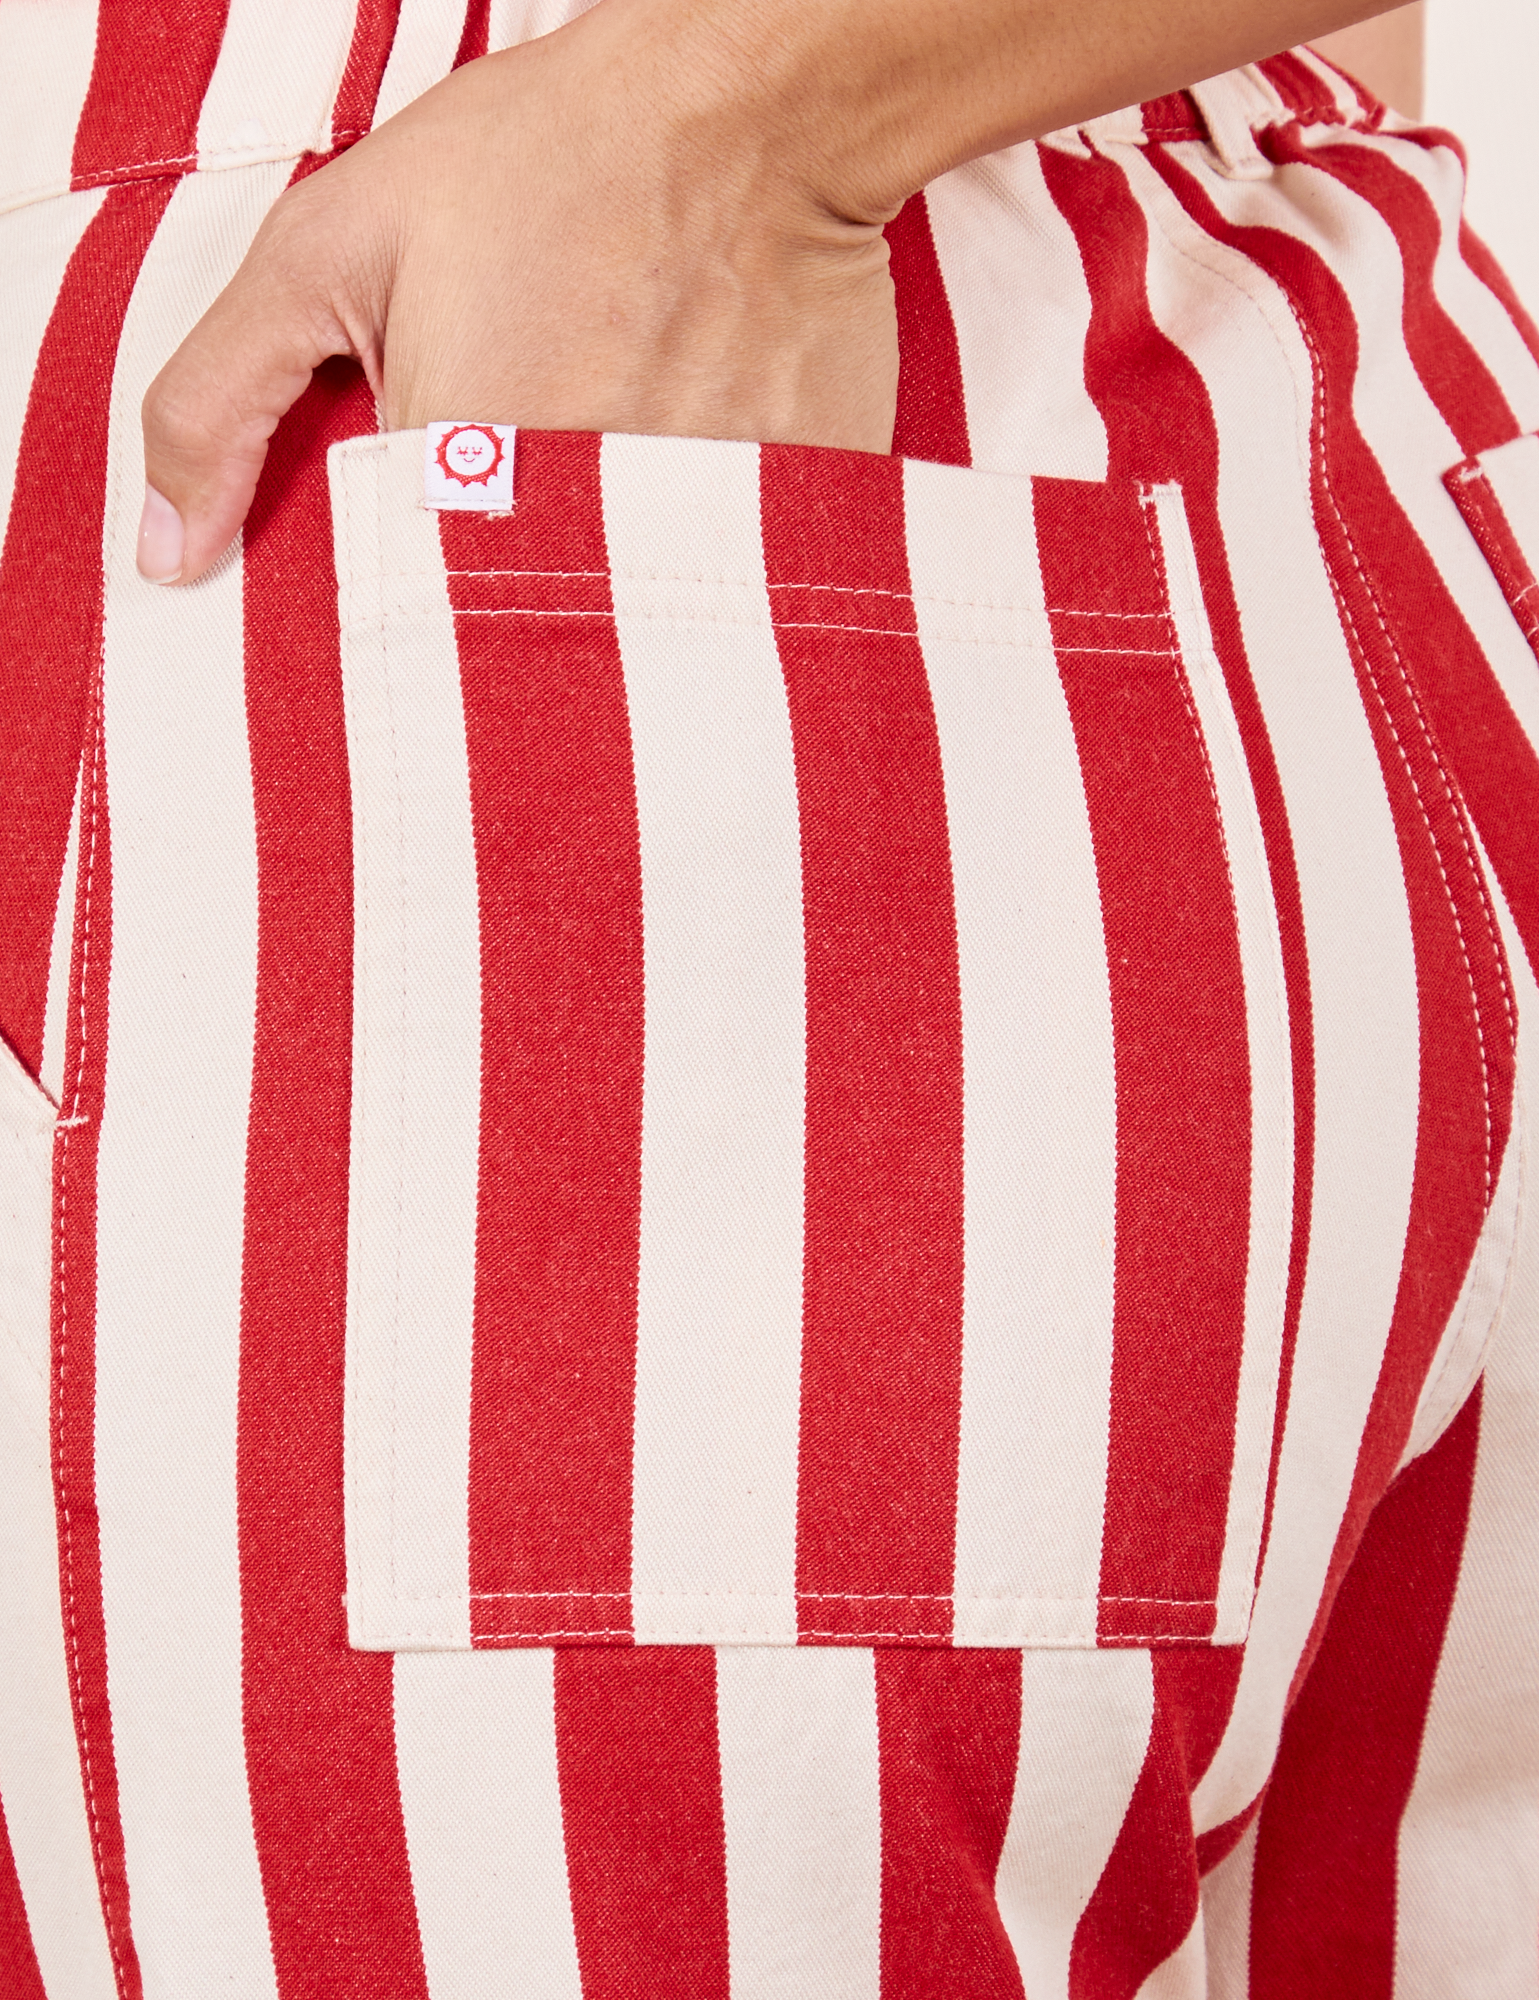 Work Pants in Cherry Stripe back pocket close up. Tiara has her hand in the pocket.